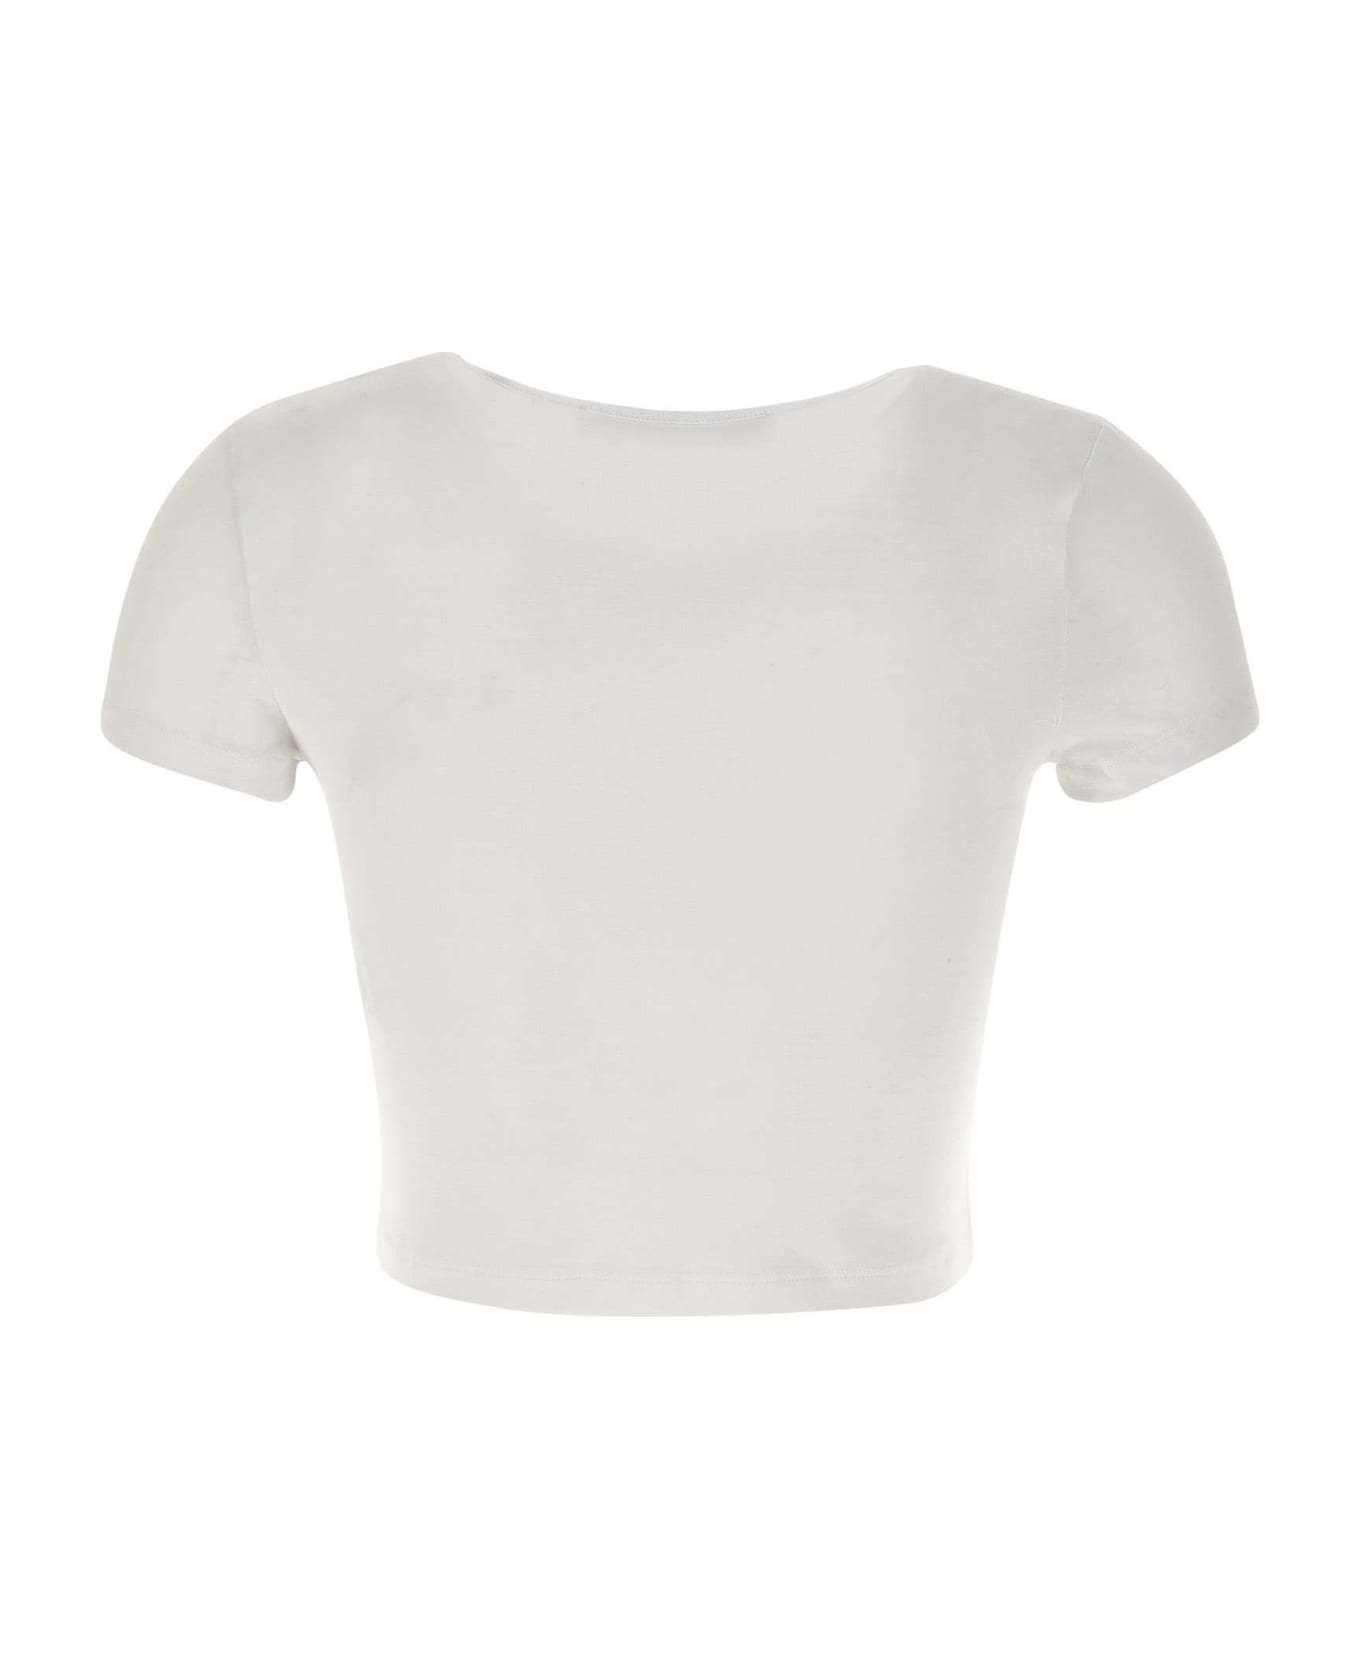 Rotate by Birger Christensen "may" Top - WHITE Tシャツ